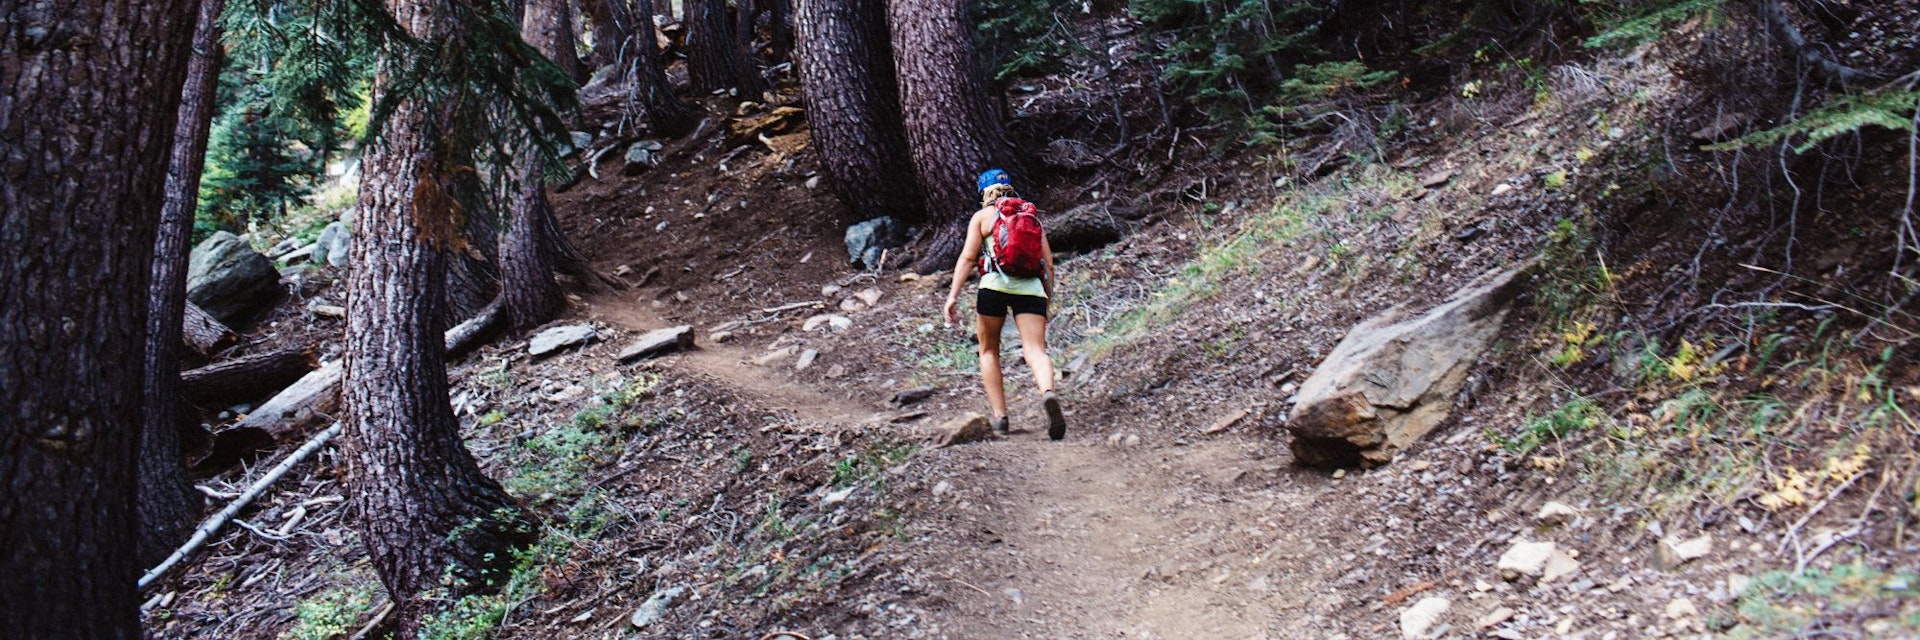 Woman hiking through forest, rear view, Mineral King, Sequoia National Park, California, USA